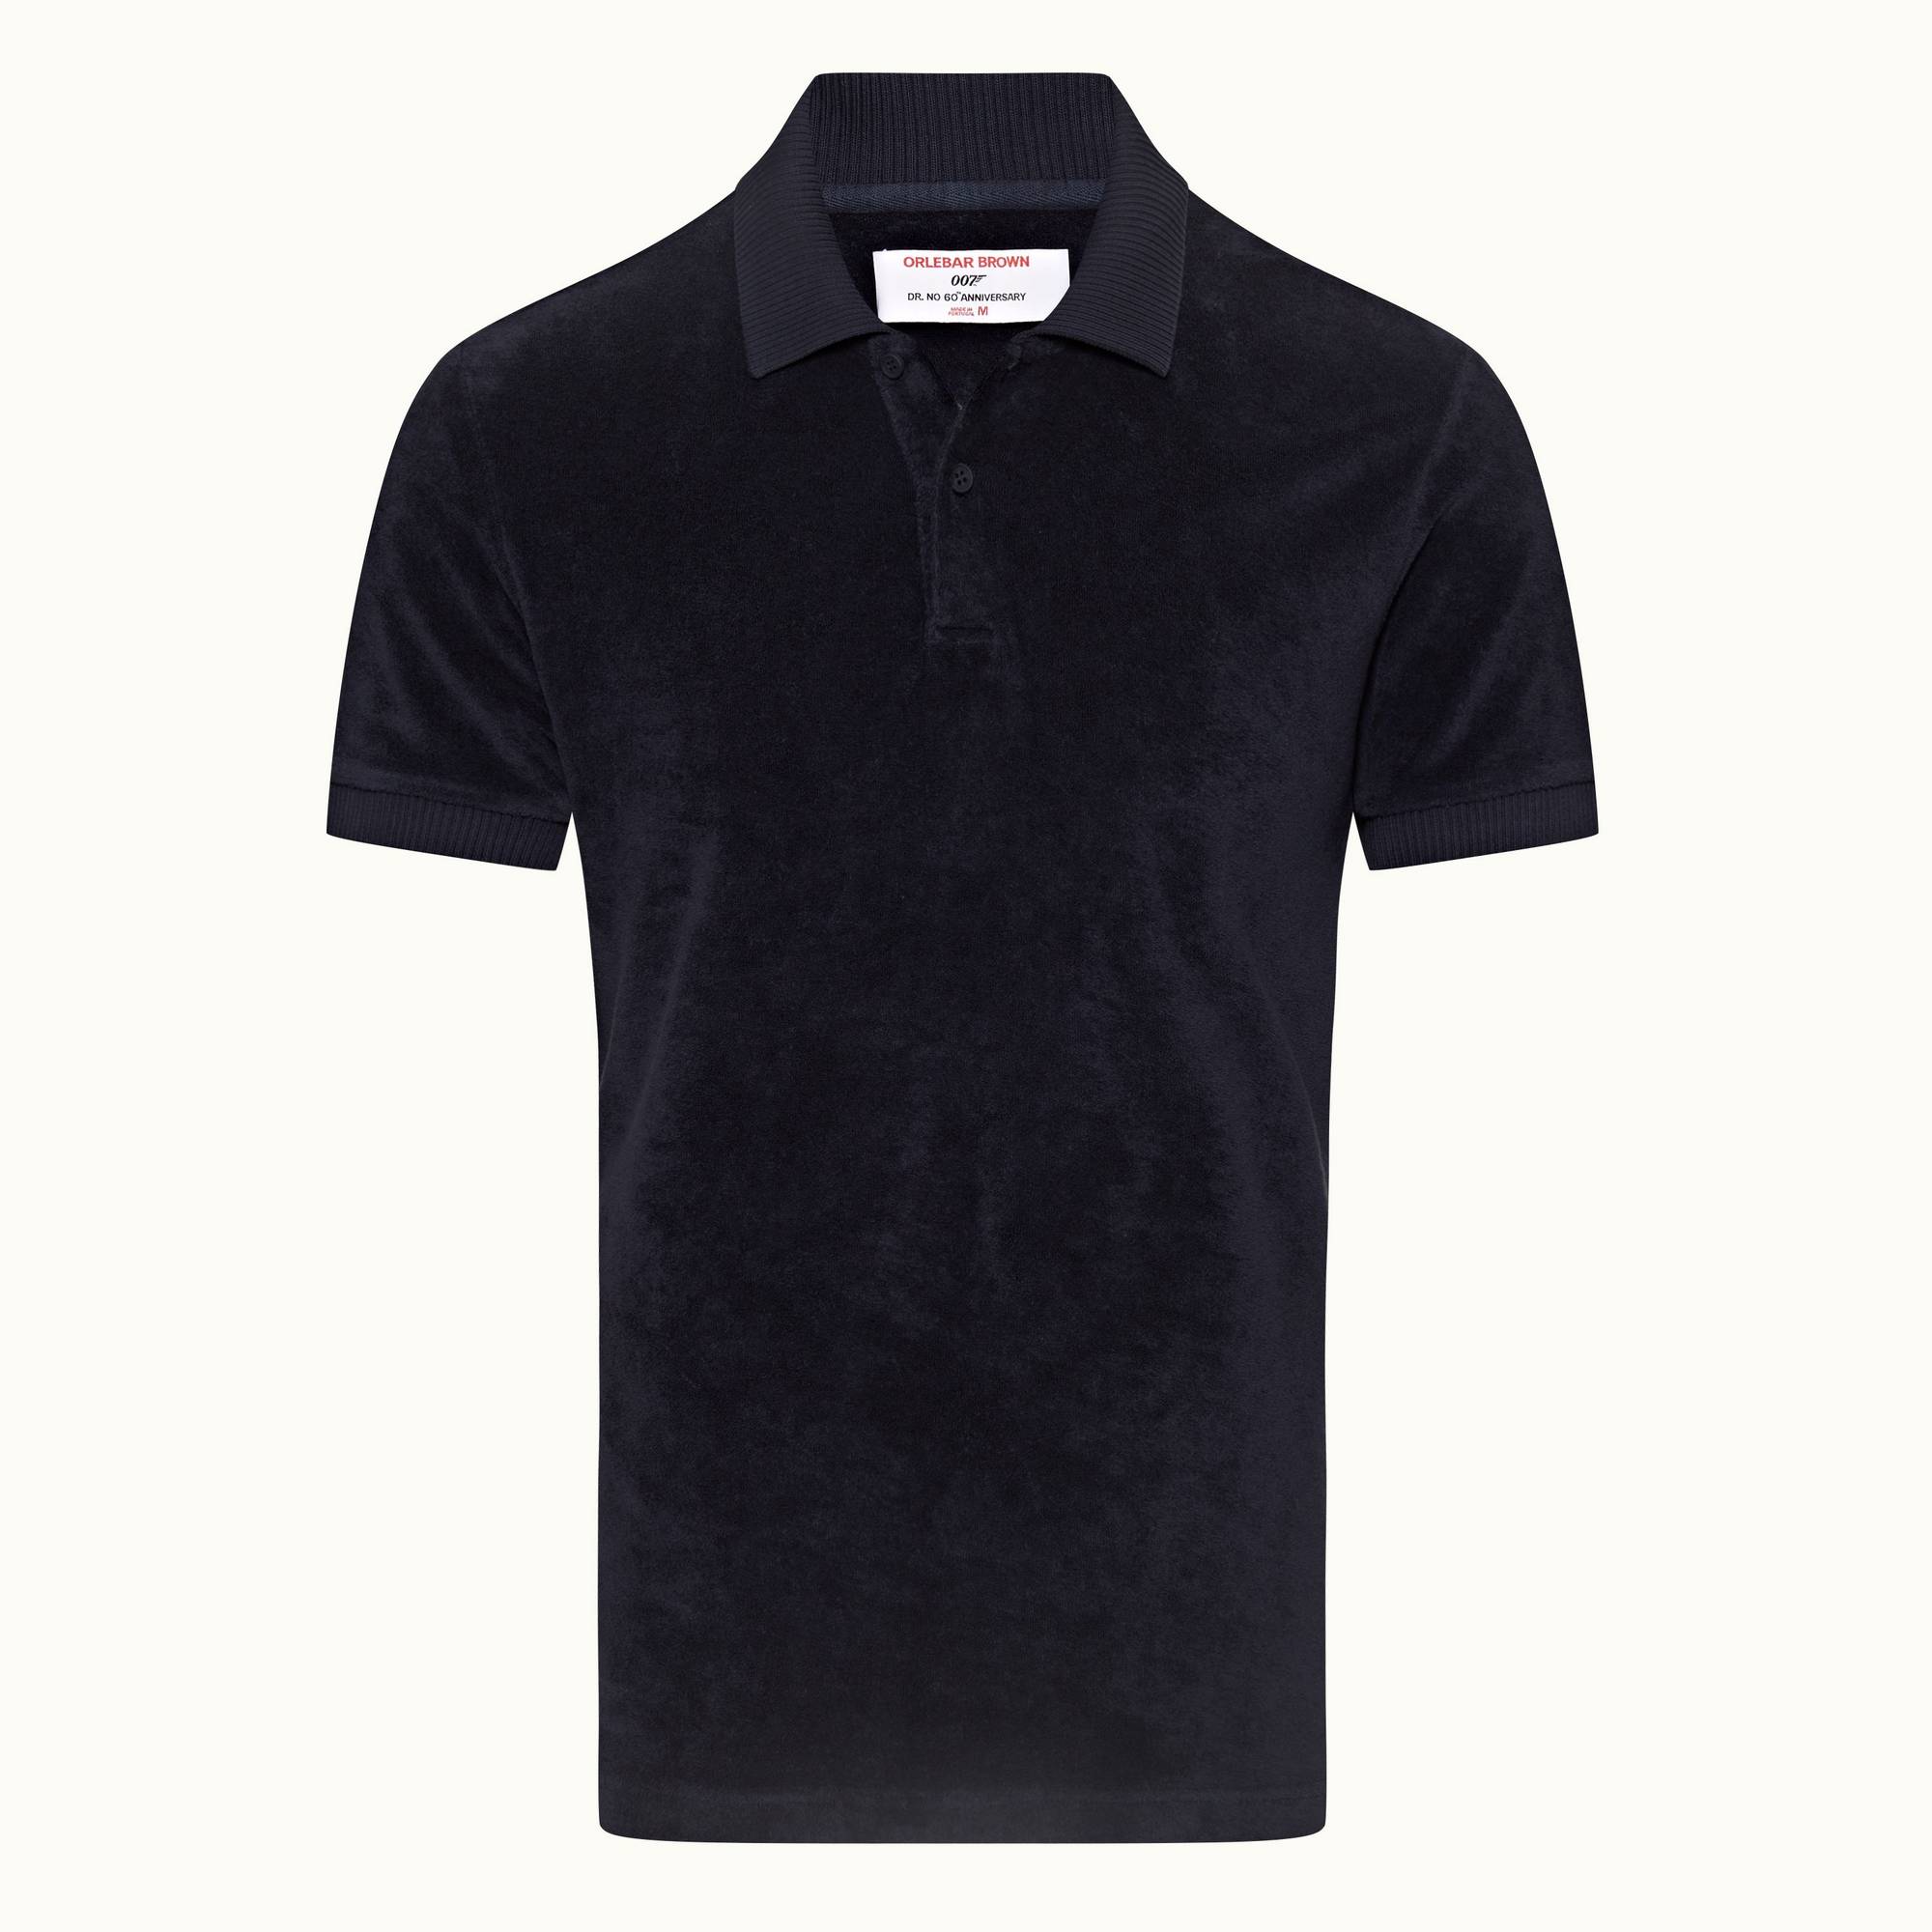 Dr No Towelling Polo - Mens Midnight Navy 007 Ryder Dr. No Towelling Polo Shirt